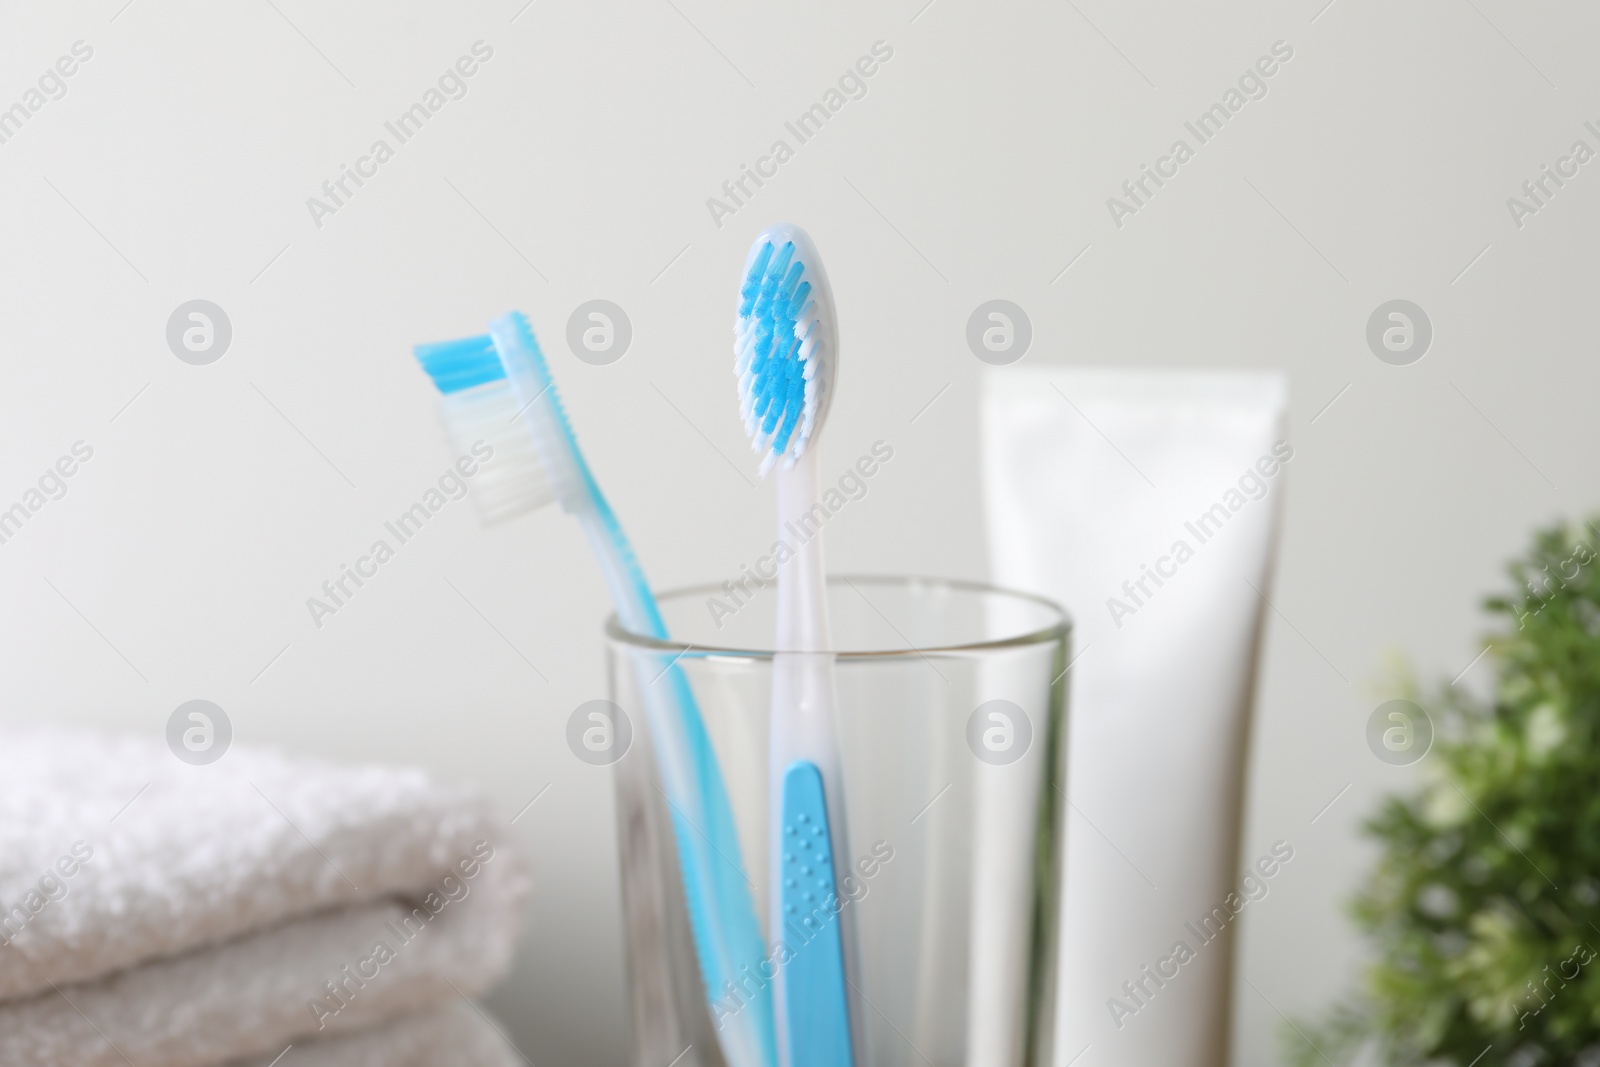 Photo of Plastic toothbrushes in glass holder on blurred background, closeup